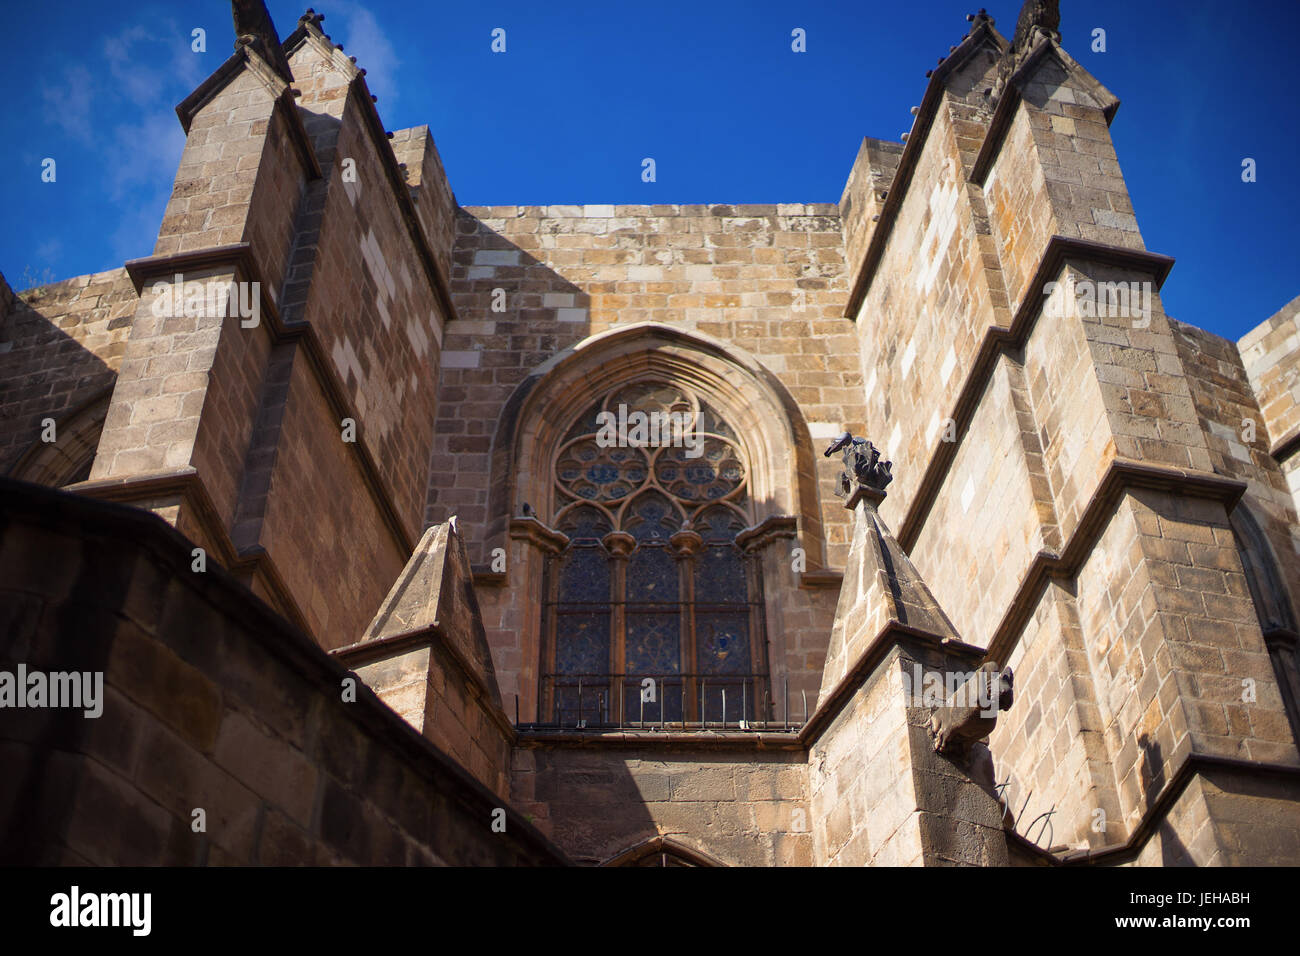 Barcelona, Spain, Barri Gotic district - facade of a medieval gothic building Stock Photo